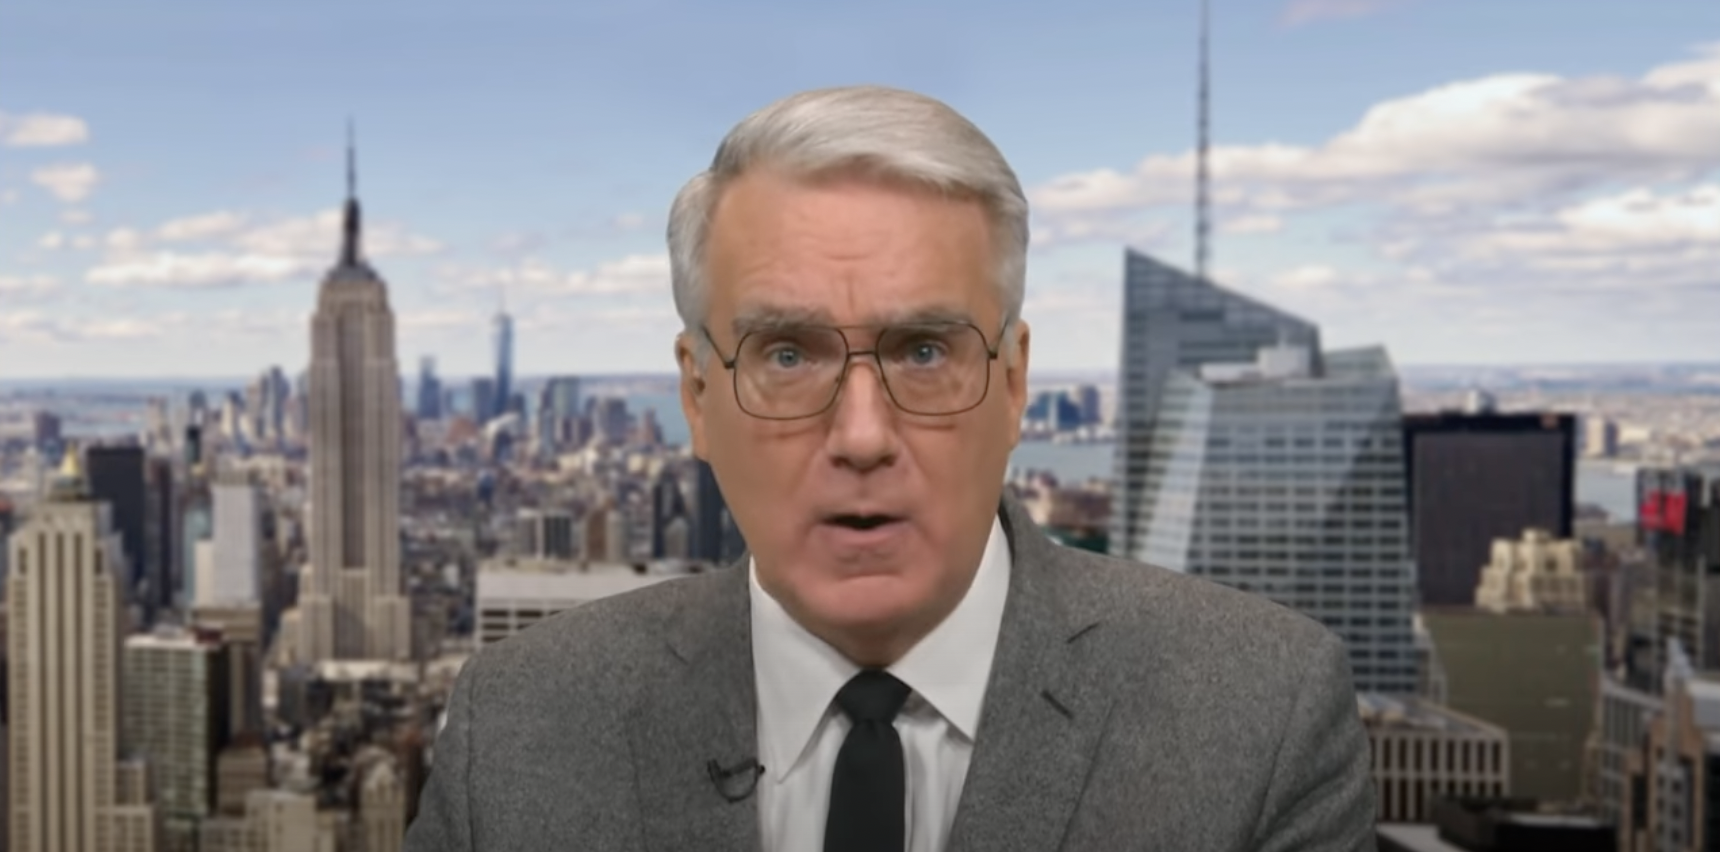 Former ESPN Contributor Keith Olbermann Calls for Donald Trump to Be Arrested via “A Military Detachment” and That He Be Tried in a “Military Court”